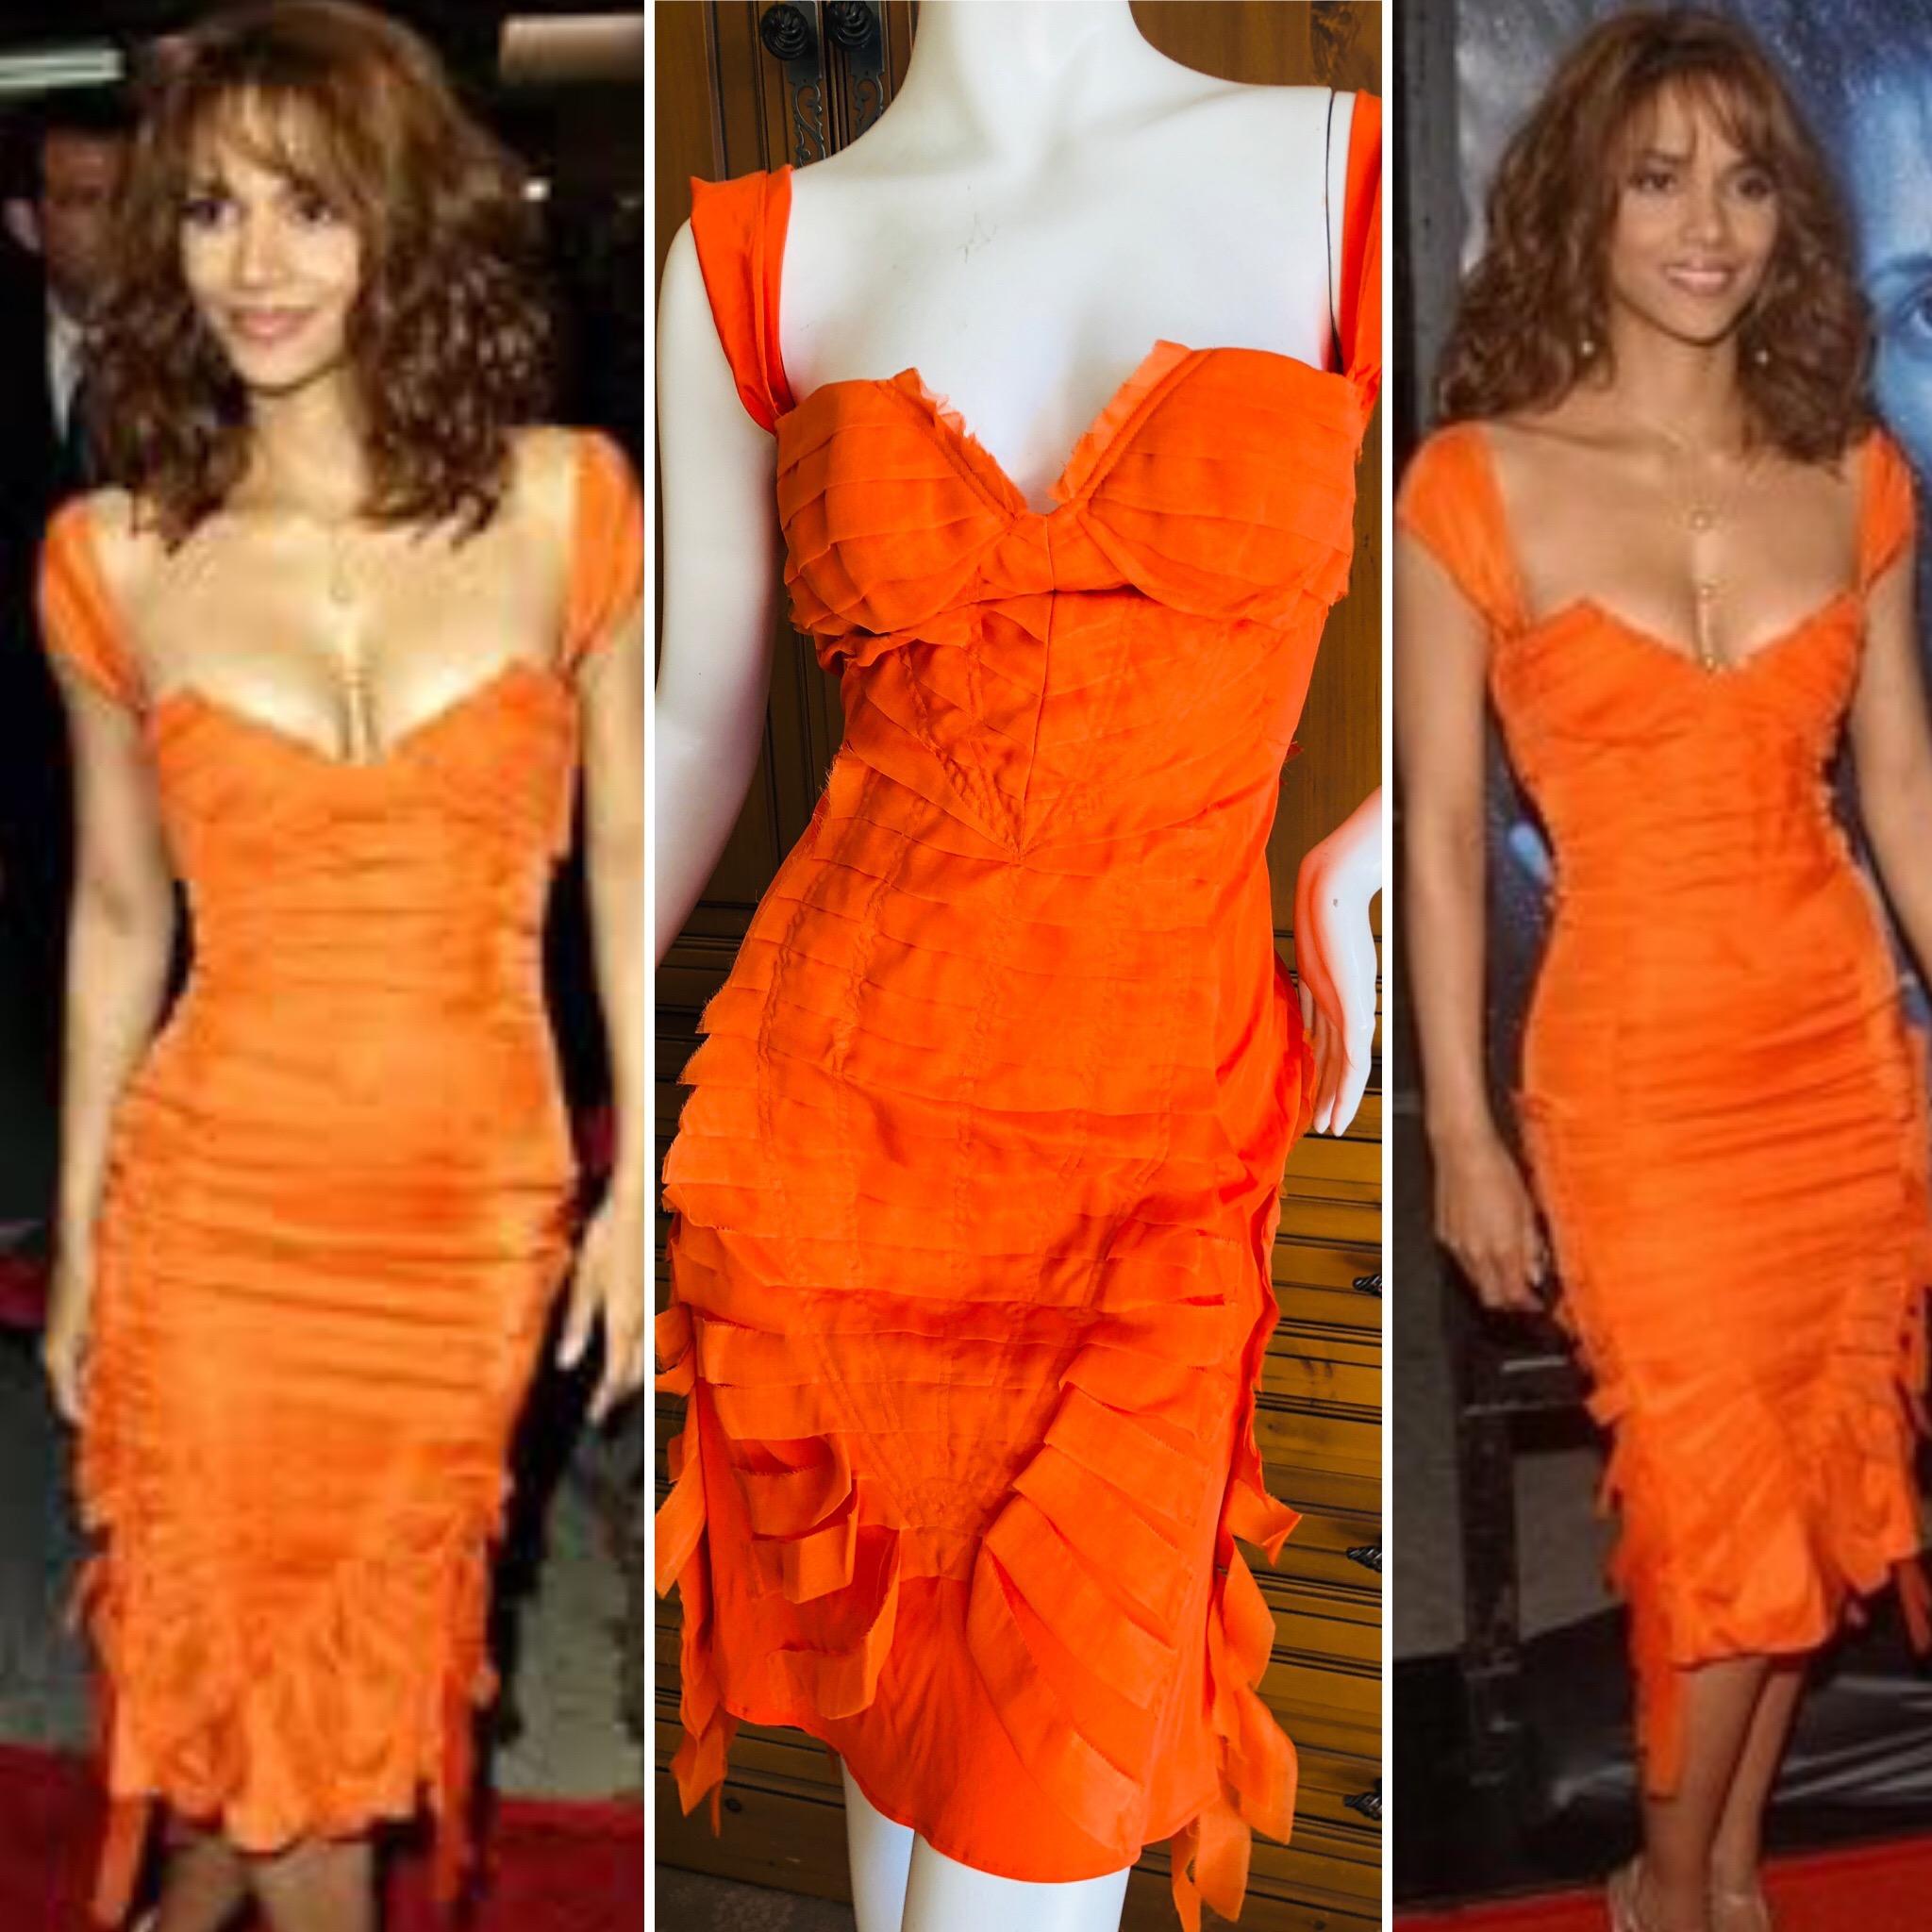 Gucci by Tom Ford  orange ribbon dress 2004 .
Appears in Tom Ford book twice, in orange/red.
This is classic Tom Ford, sexy coming and going. 
Size 44
 Bust 34